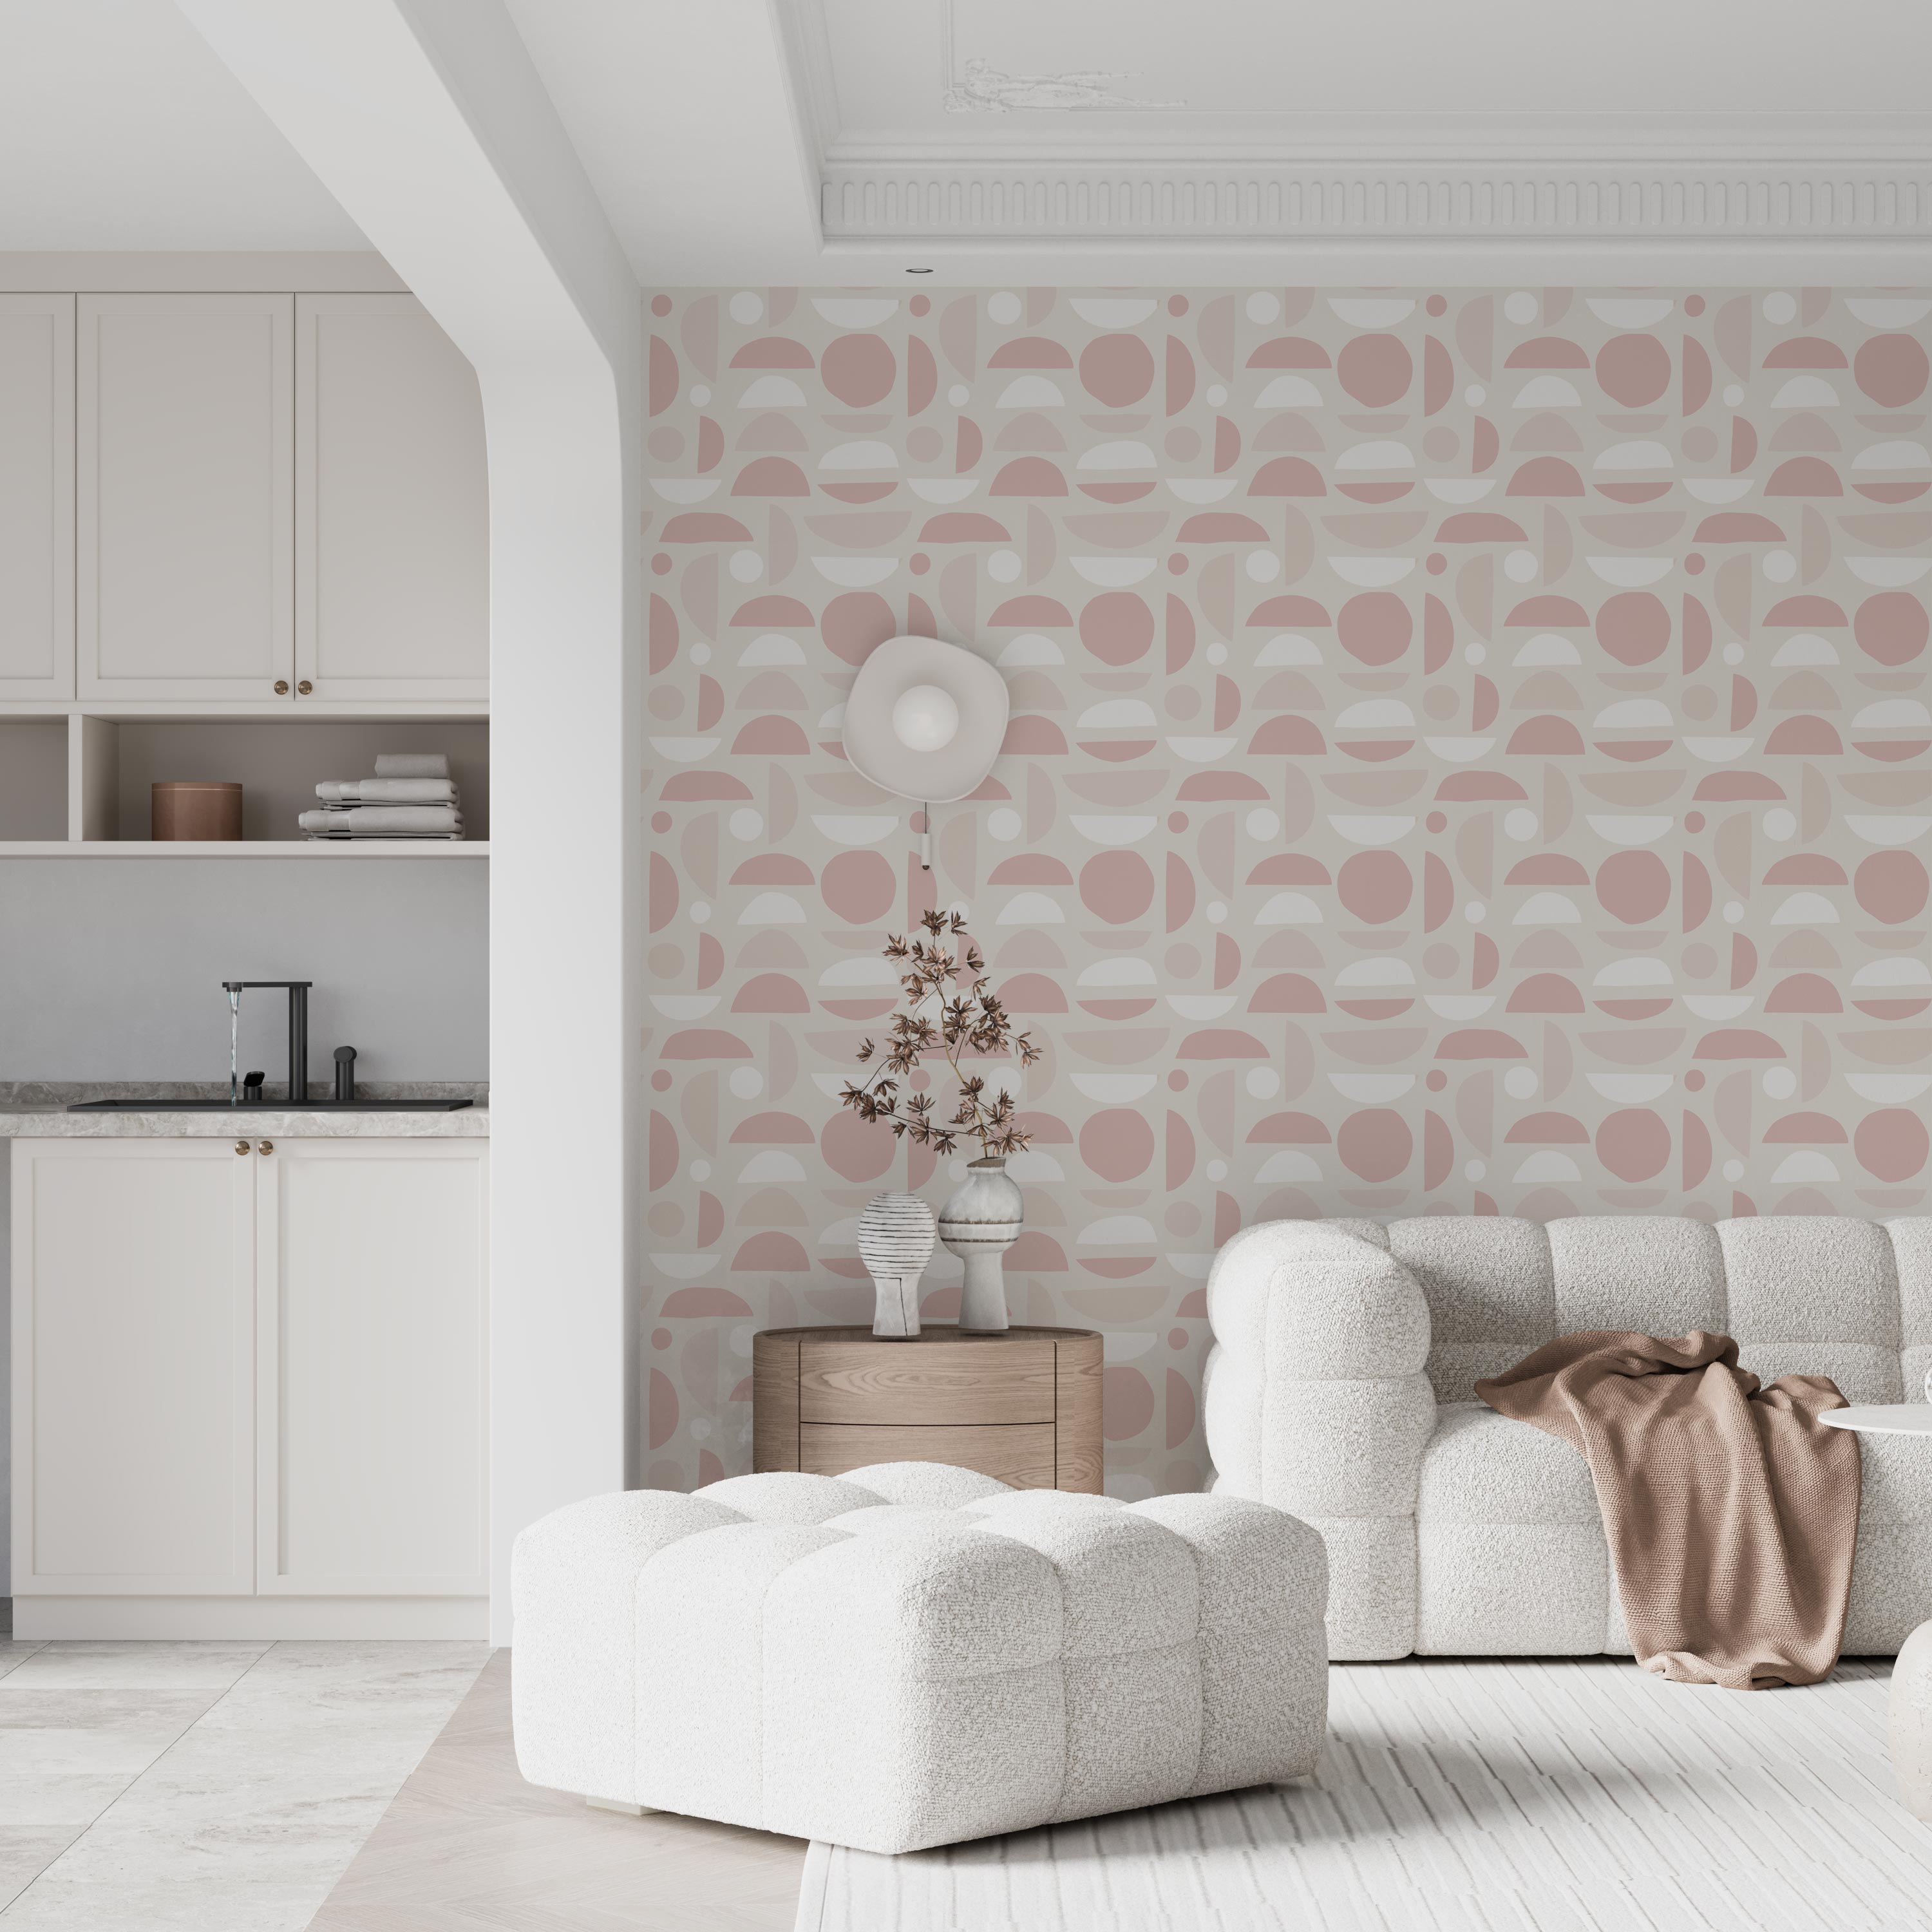 files/The-mid-century-modern-pink-wallpaper-mural-creats-a-sense-of-visual-continuity-and-adding-a-touch-of-sophistication-to-the-living-room.-The-cozy-sofa-and-armchairs-provide-inviting-s.jpg